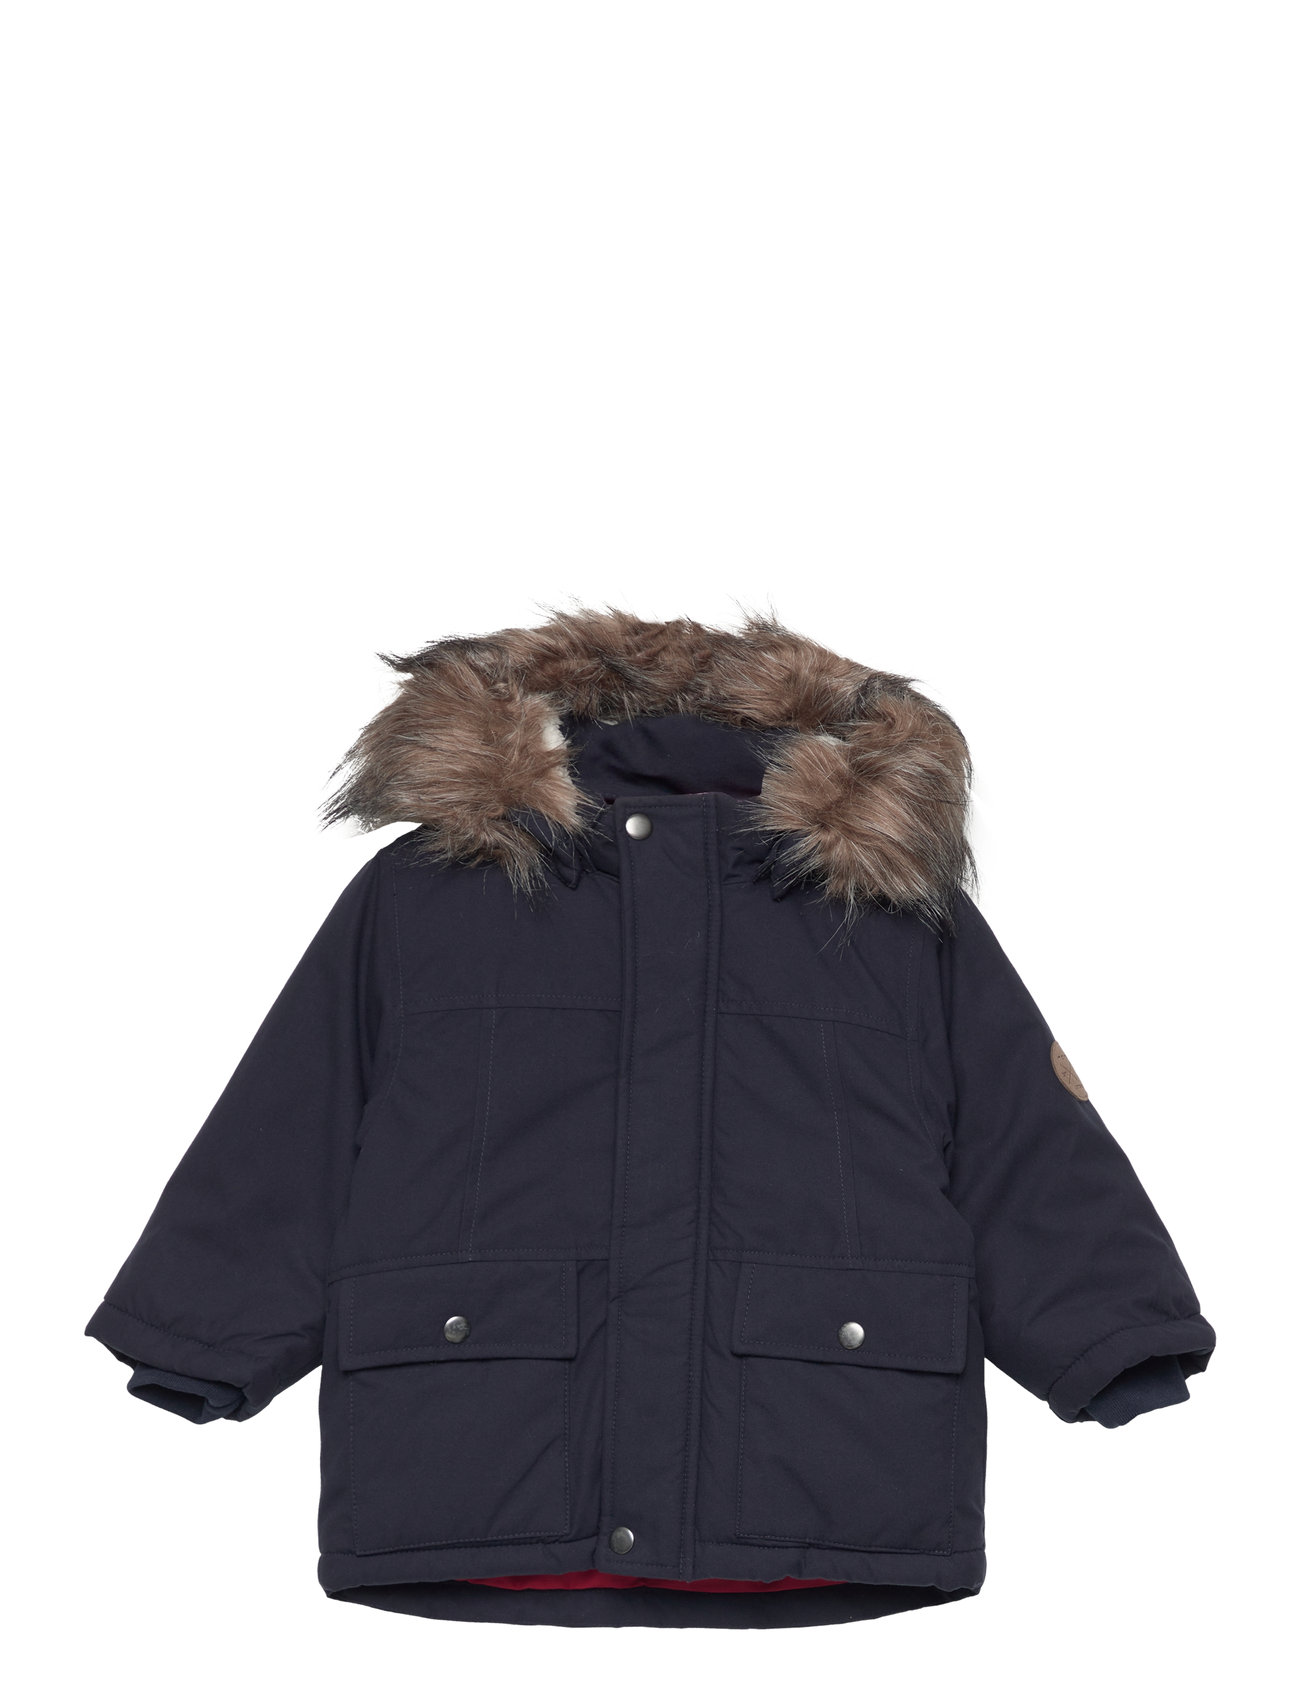 Boozt.com. Fast - online returns at easy name 27.50 Fo Buy Pb €. from Jacket name Parka Nmmmarlin it and Parkas delivery it